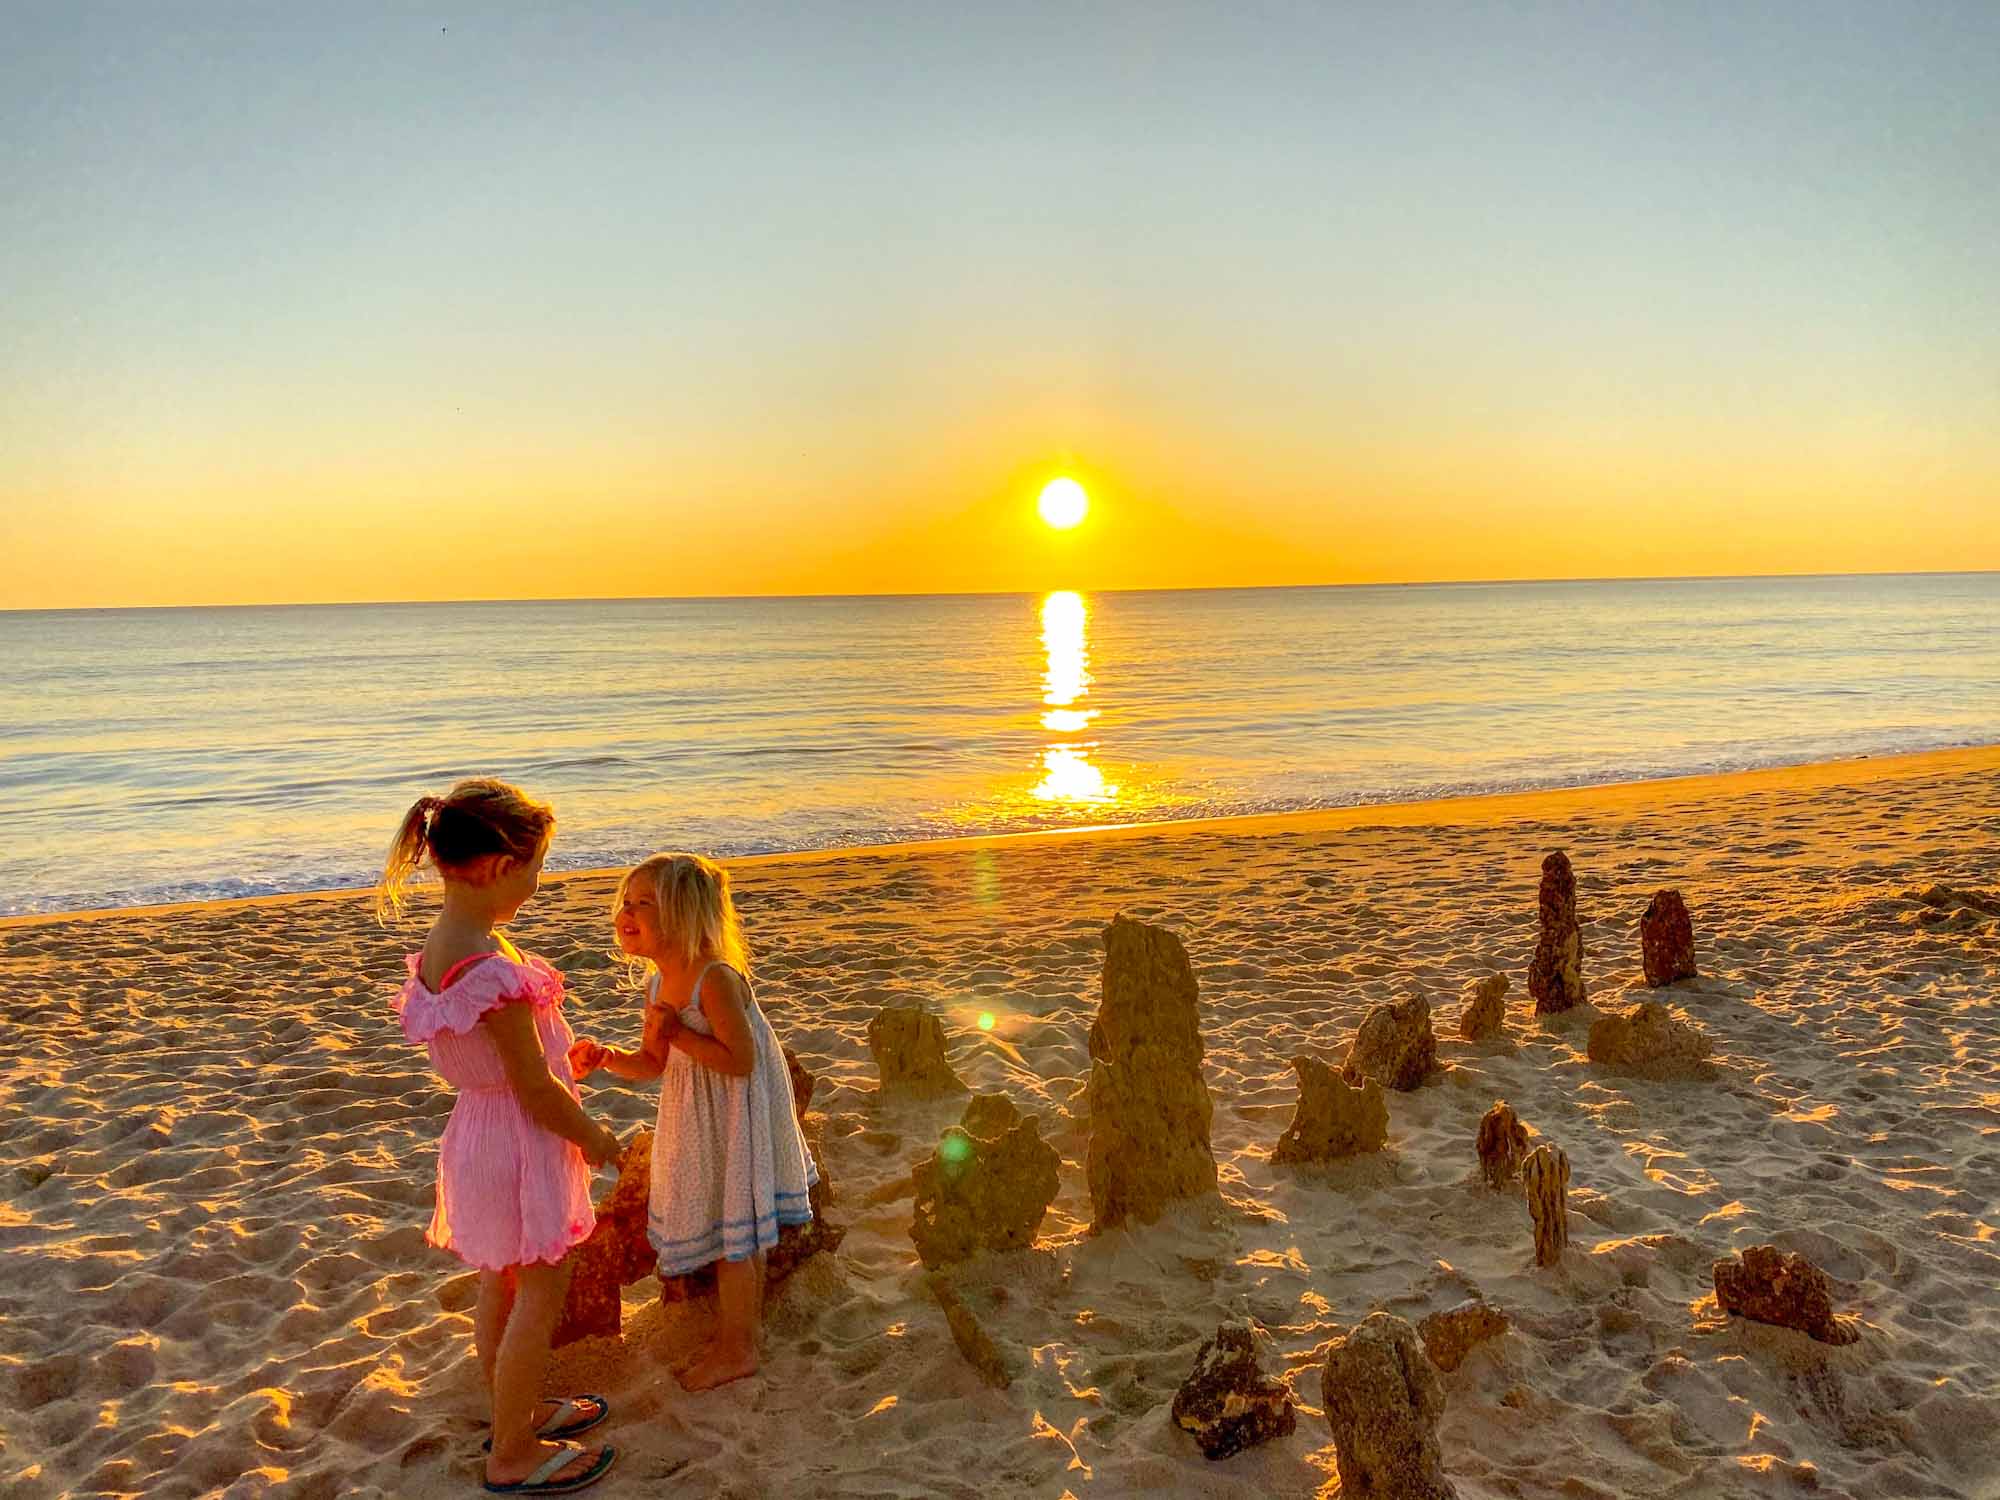 2 small girls stood on a sandy beach with the sun setting behind